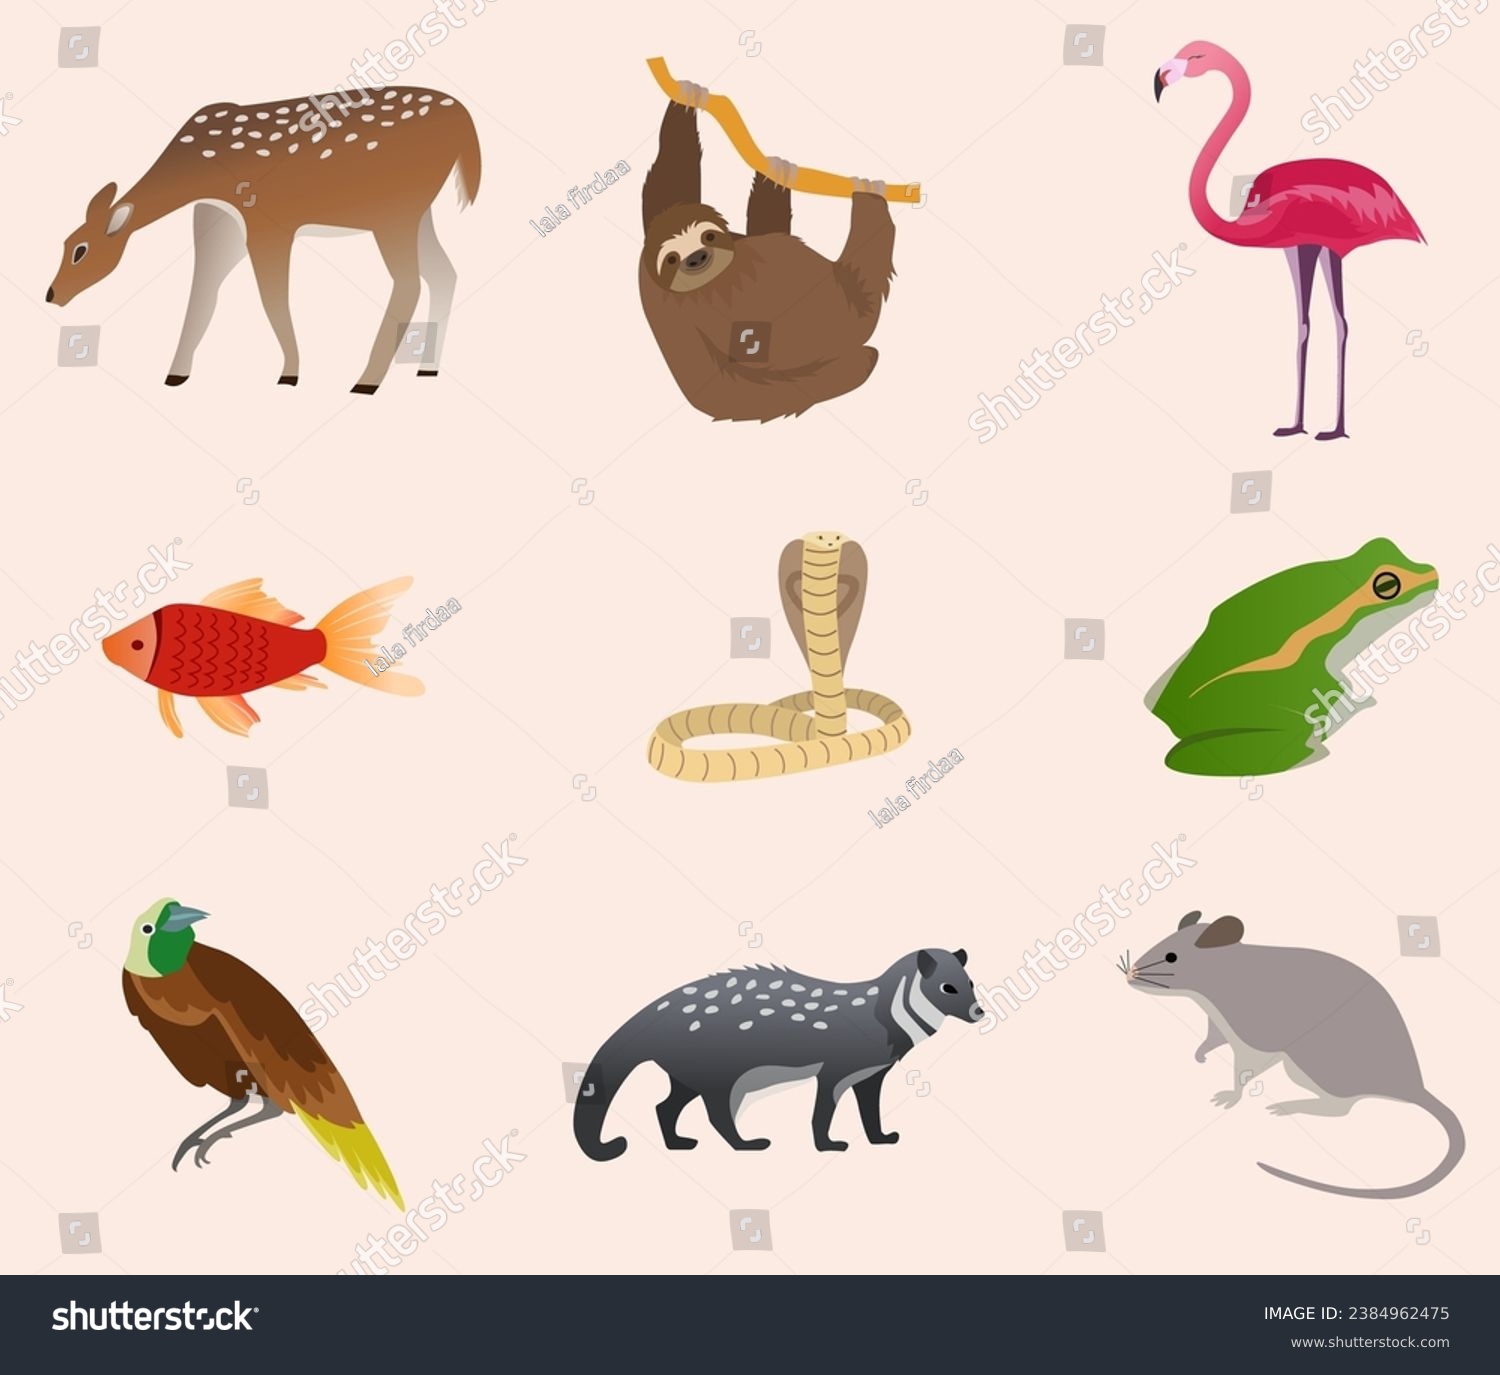 SVG of animals set collection vector illustration, all animals in different sector, amphibia, reptile, mammal, aves animals svg